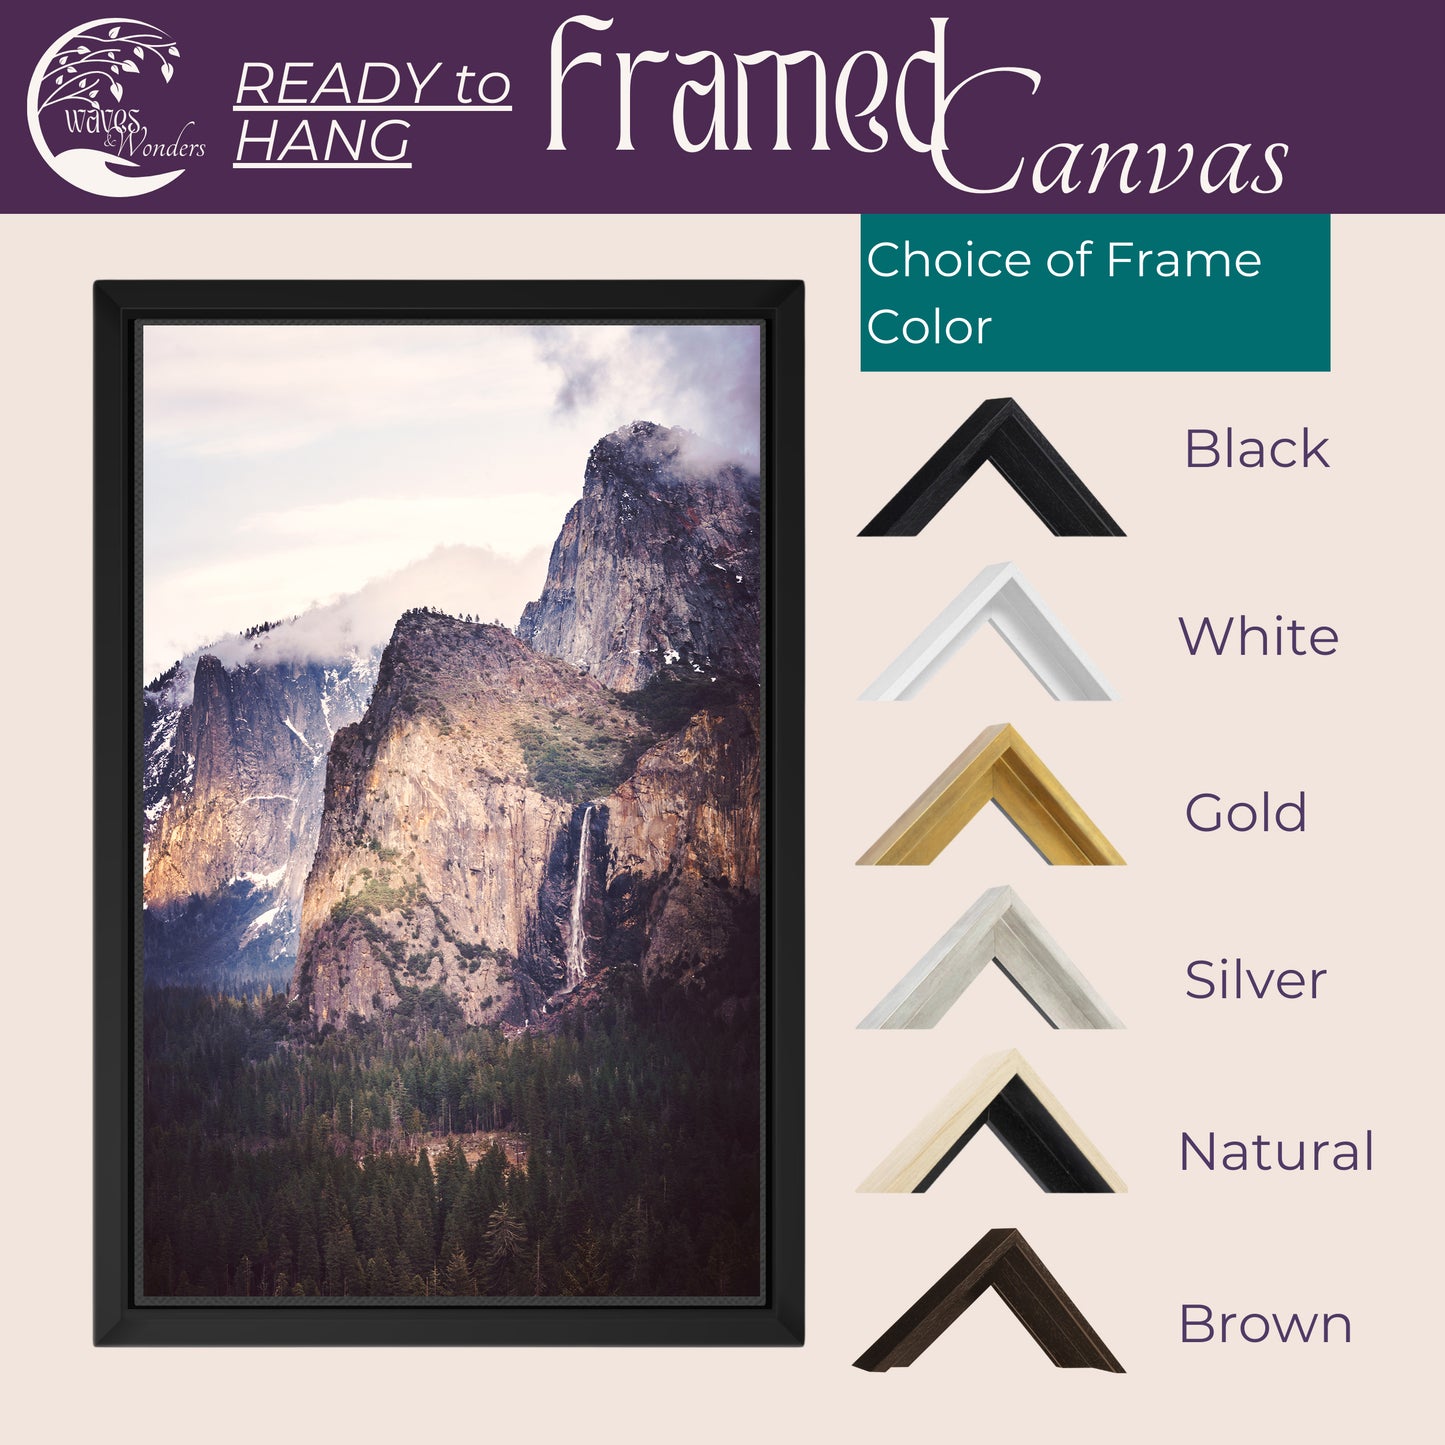 a picture of a mountain range with a frame